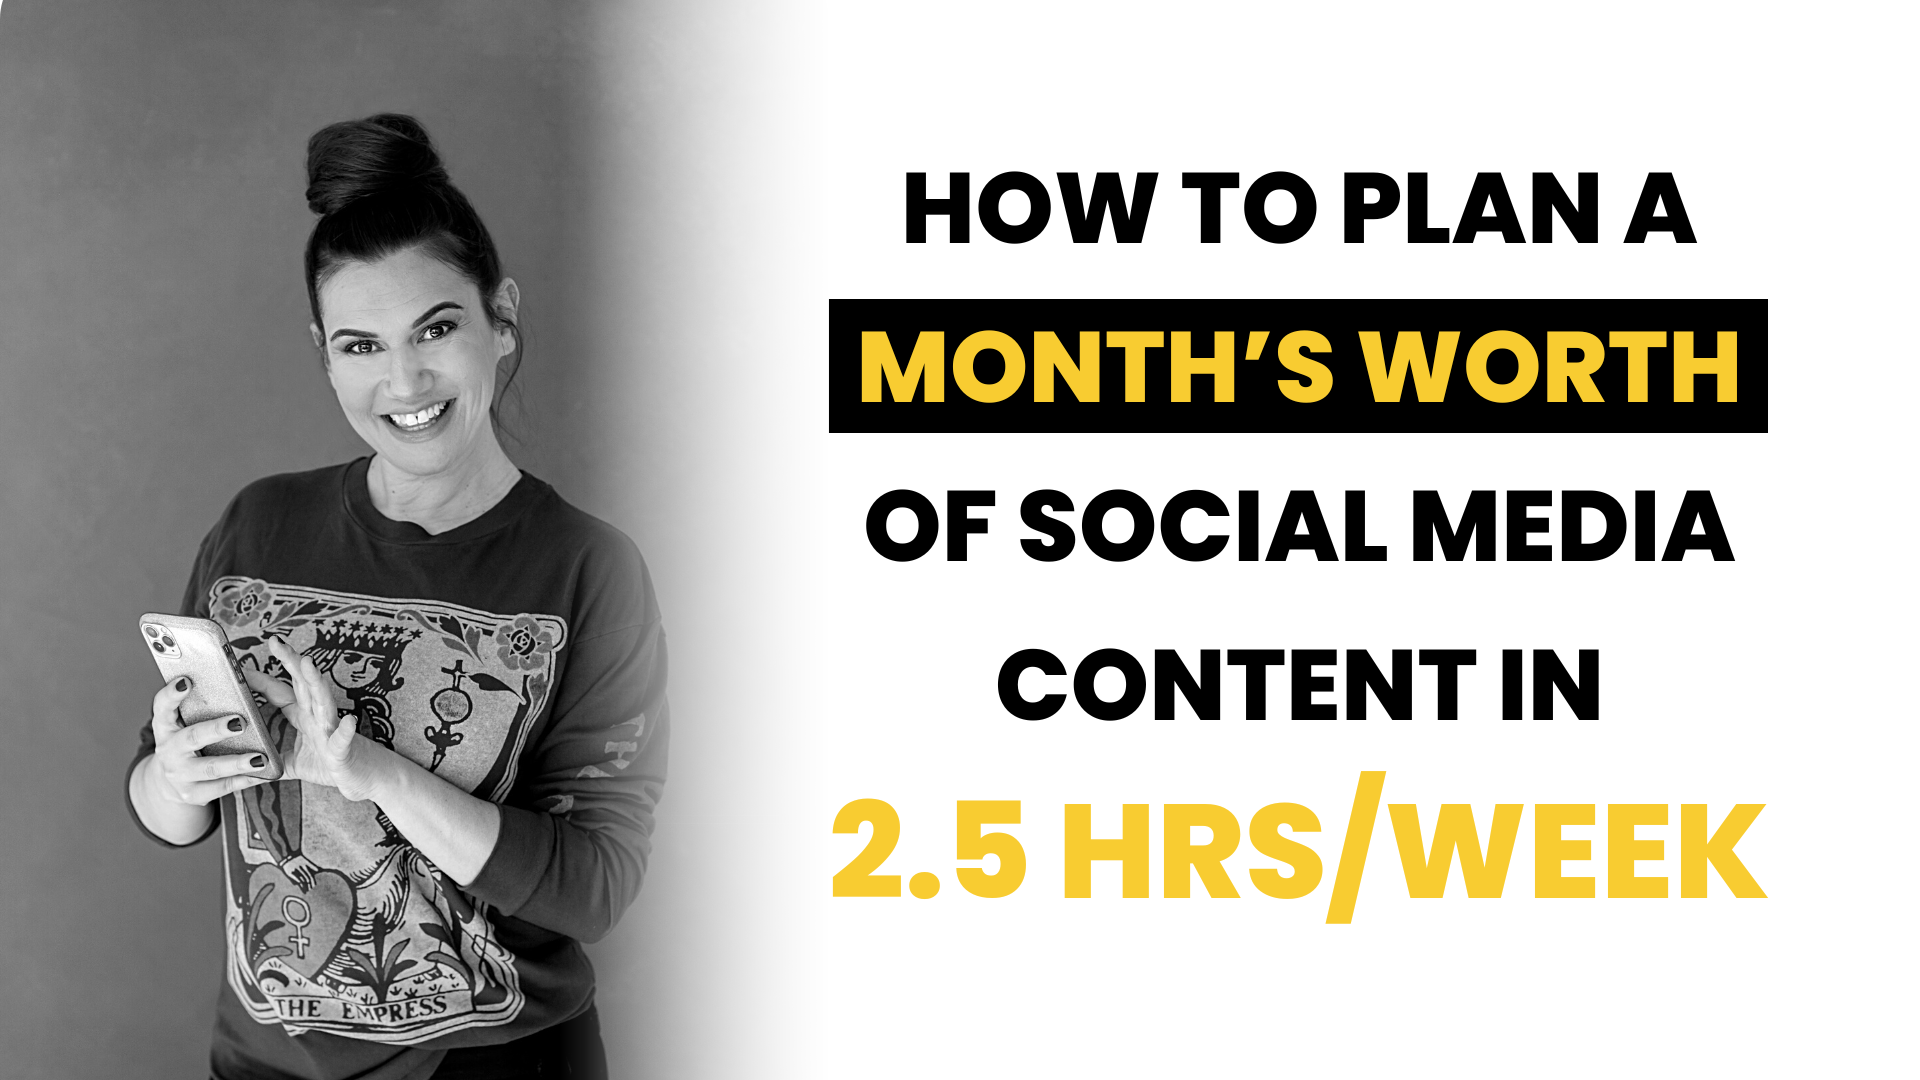 How to plan a months worth of social media content in 2.5 hours per week